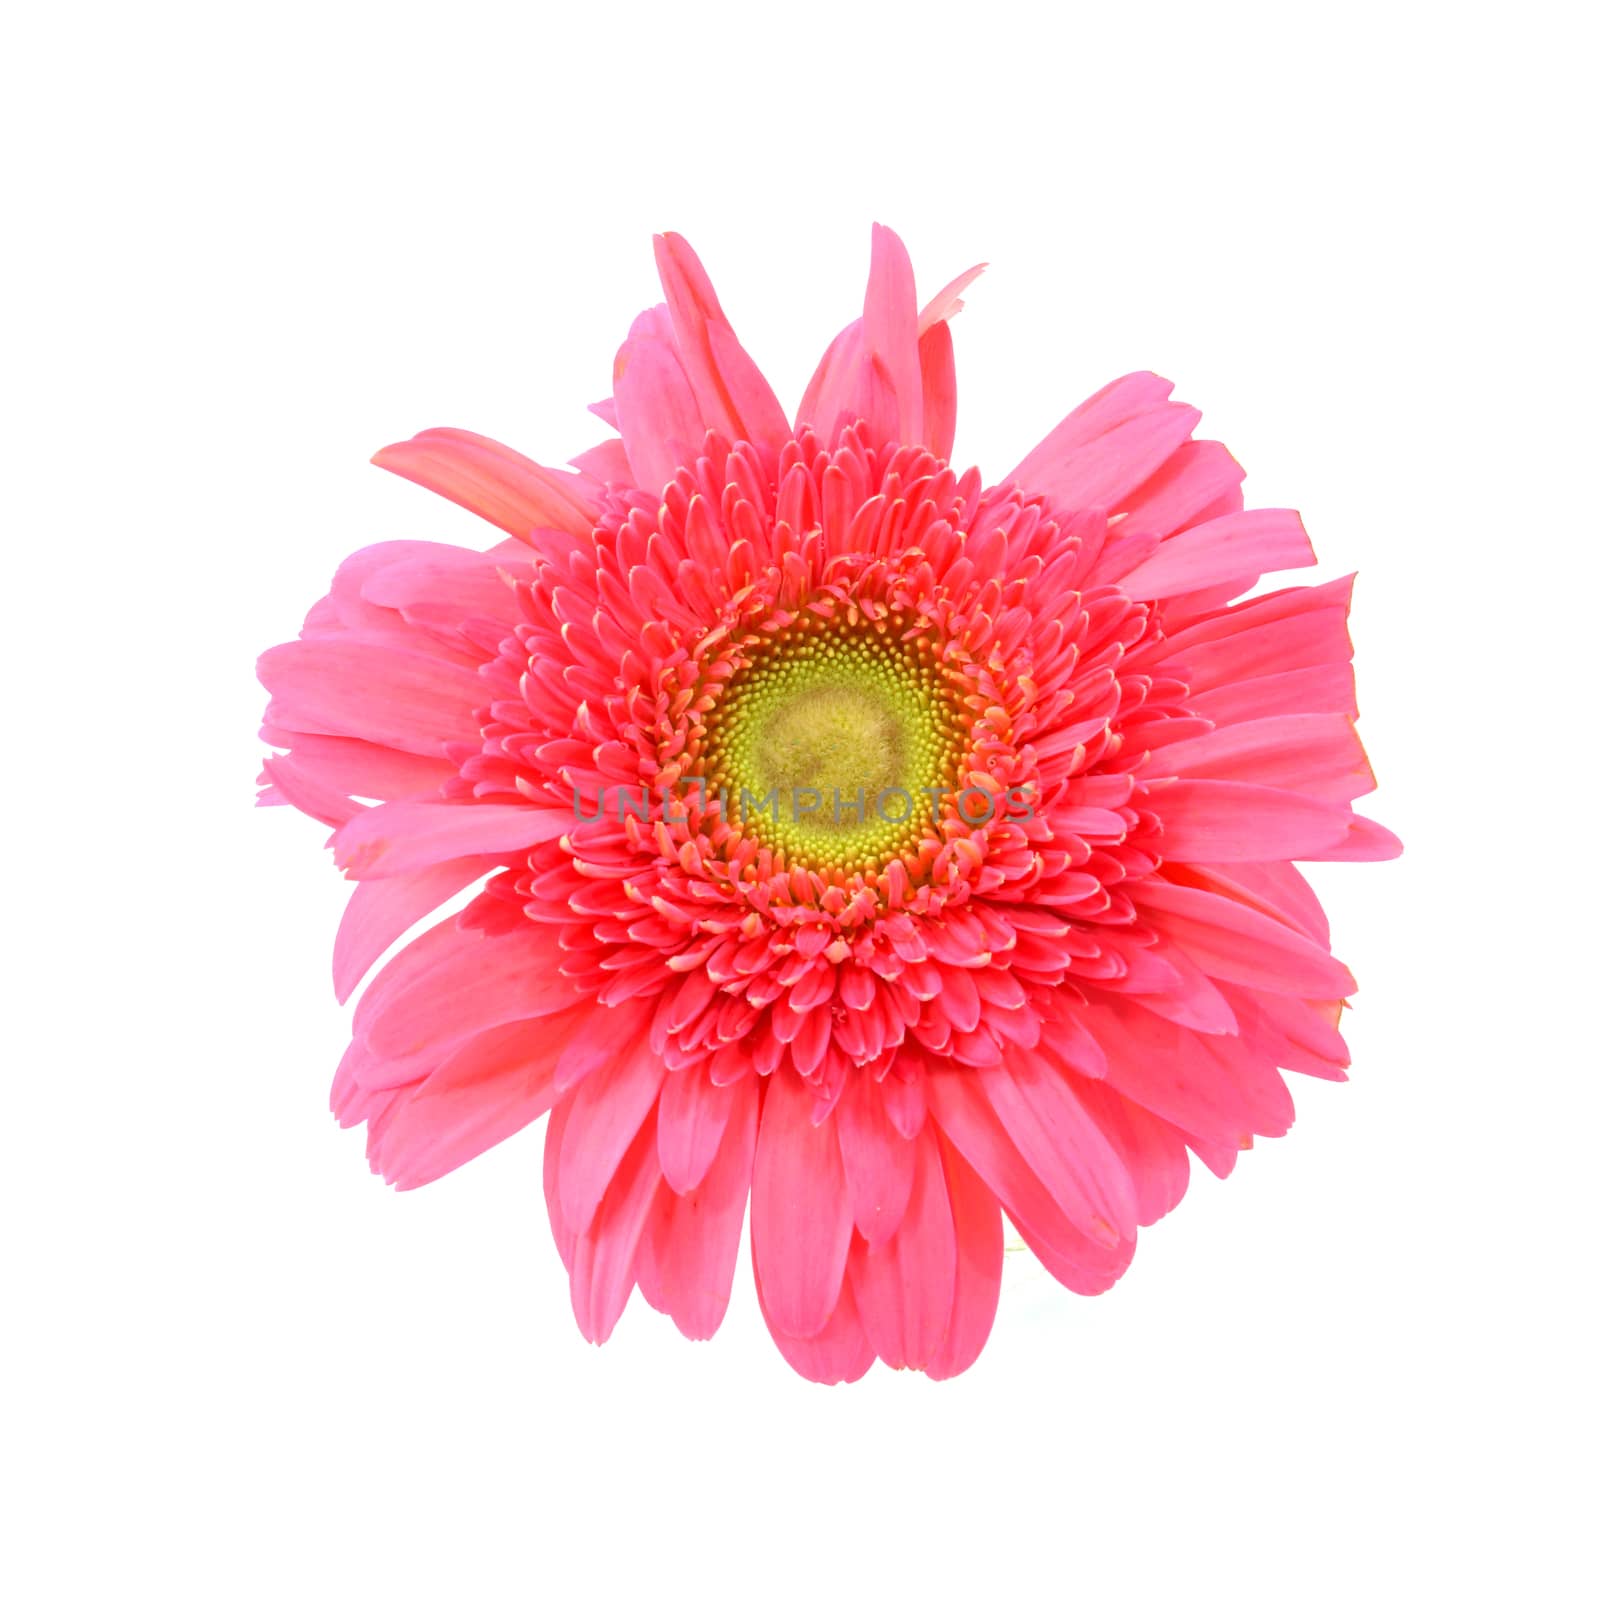 Large pink flower gerbera on a white background by Noppharat_th